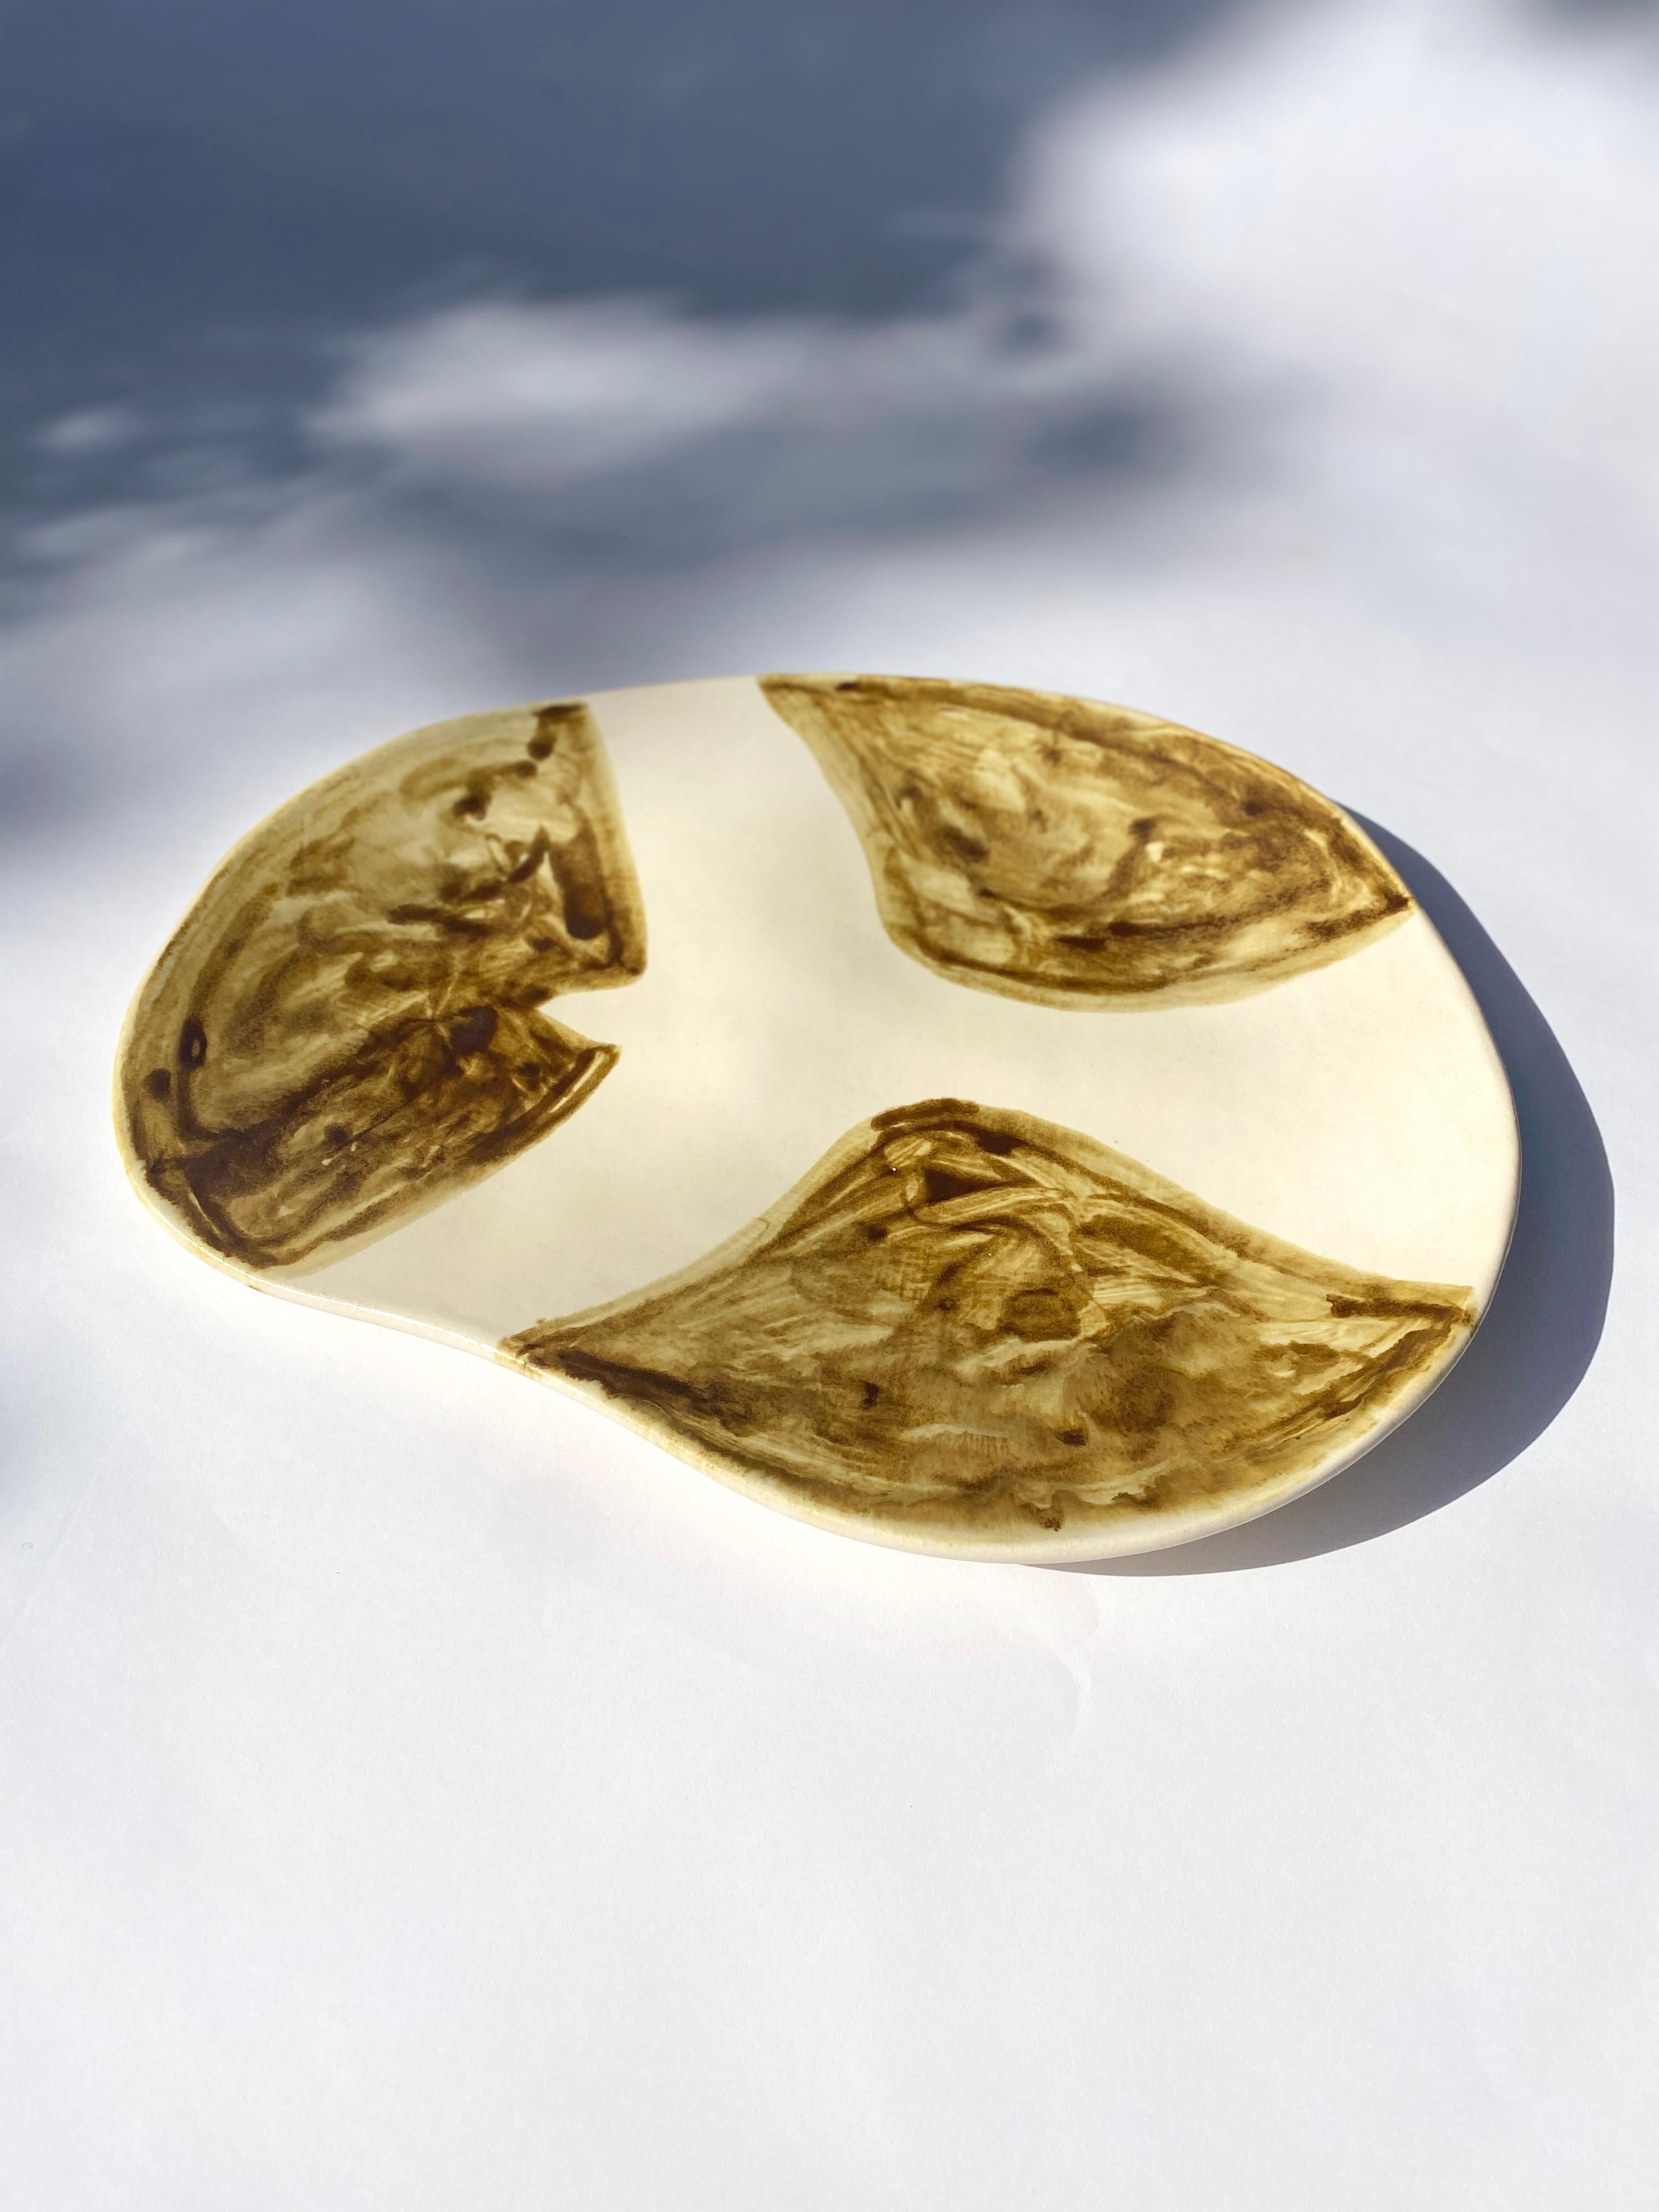 This one-of-a-kind ceramic platter was handmade in Hudson, NY by artist Sarah Mijares Fick.

Finished with a satin white glaze and a hand-painted ochre dove design, this platter is an elegant and unique statement piece. Subtle indentations act as